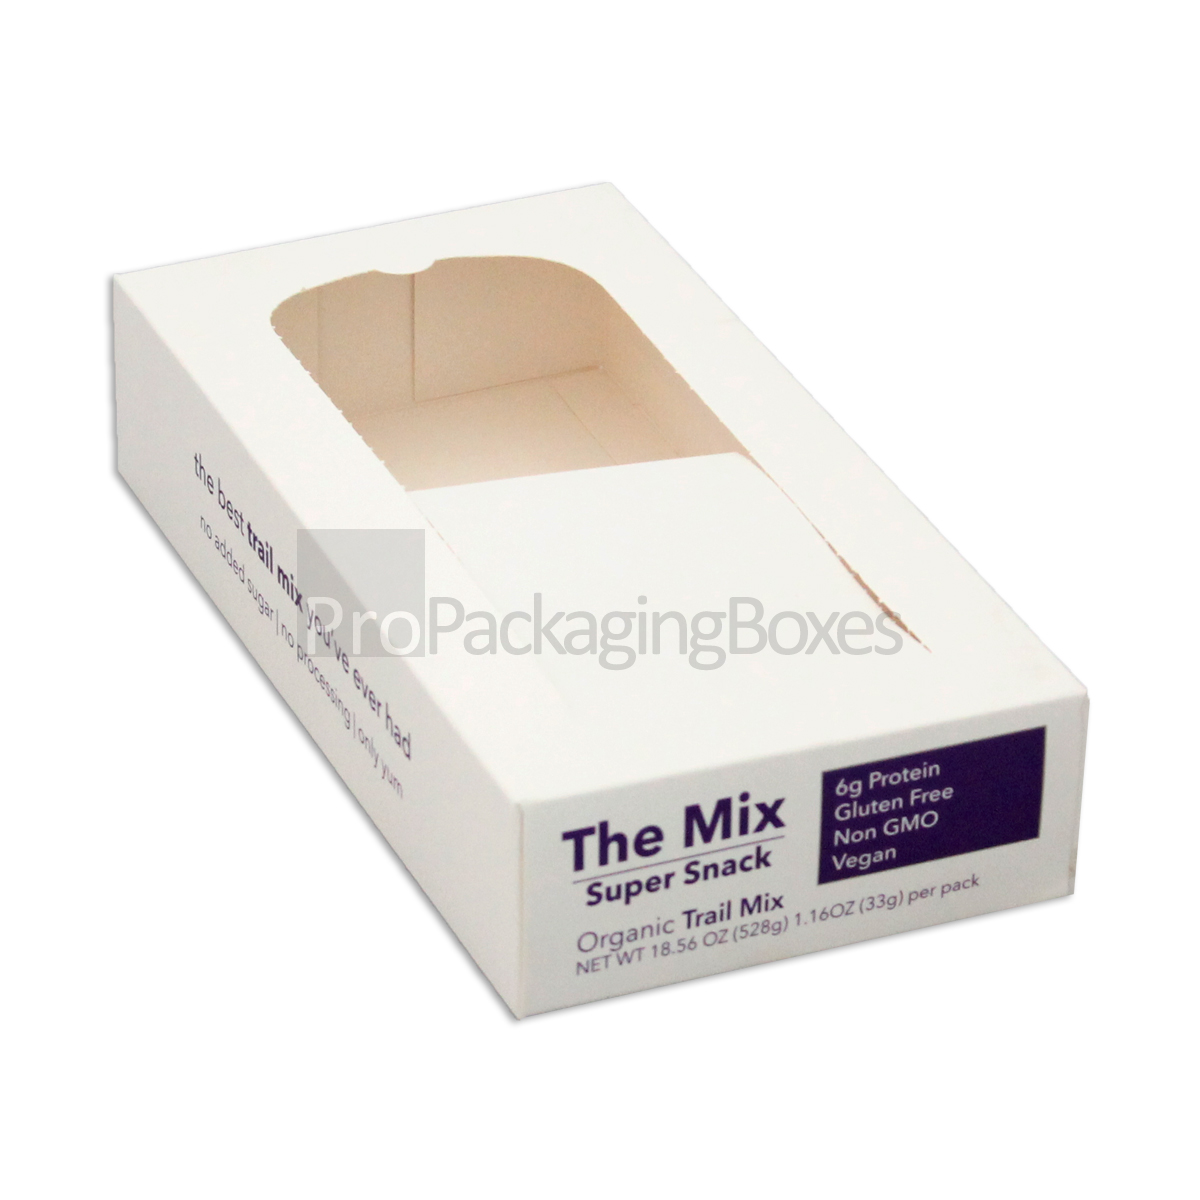 die-cut perforated boxes-example03